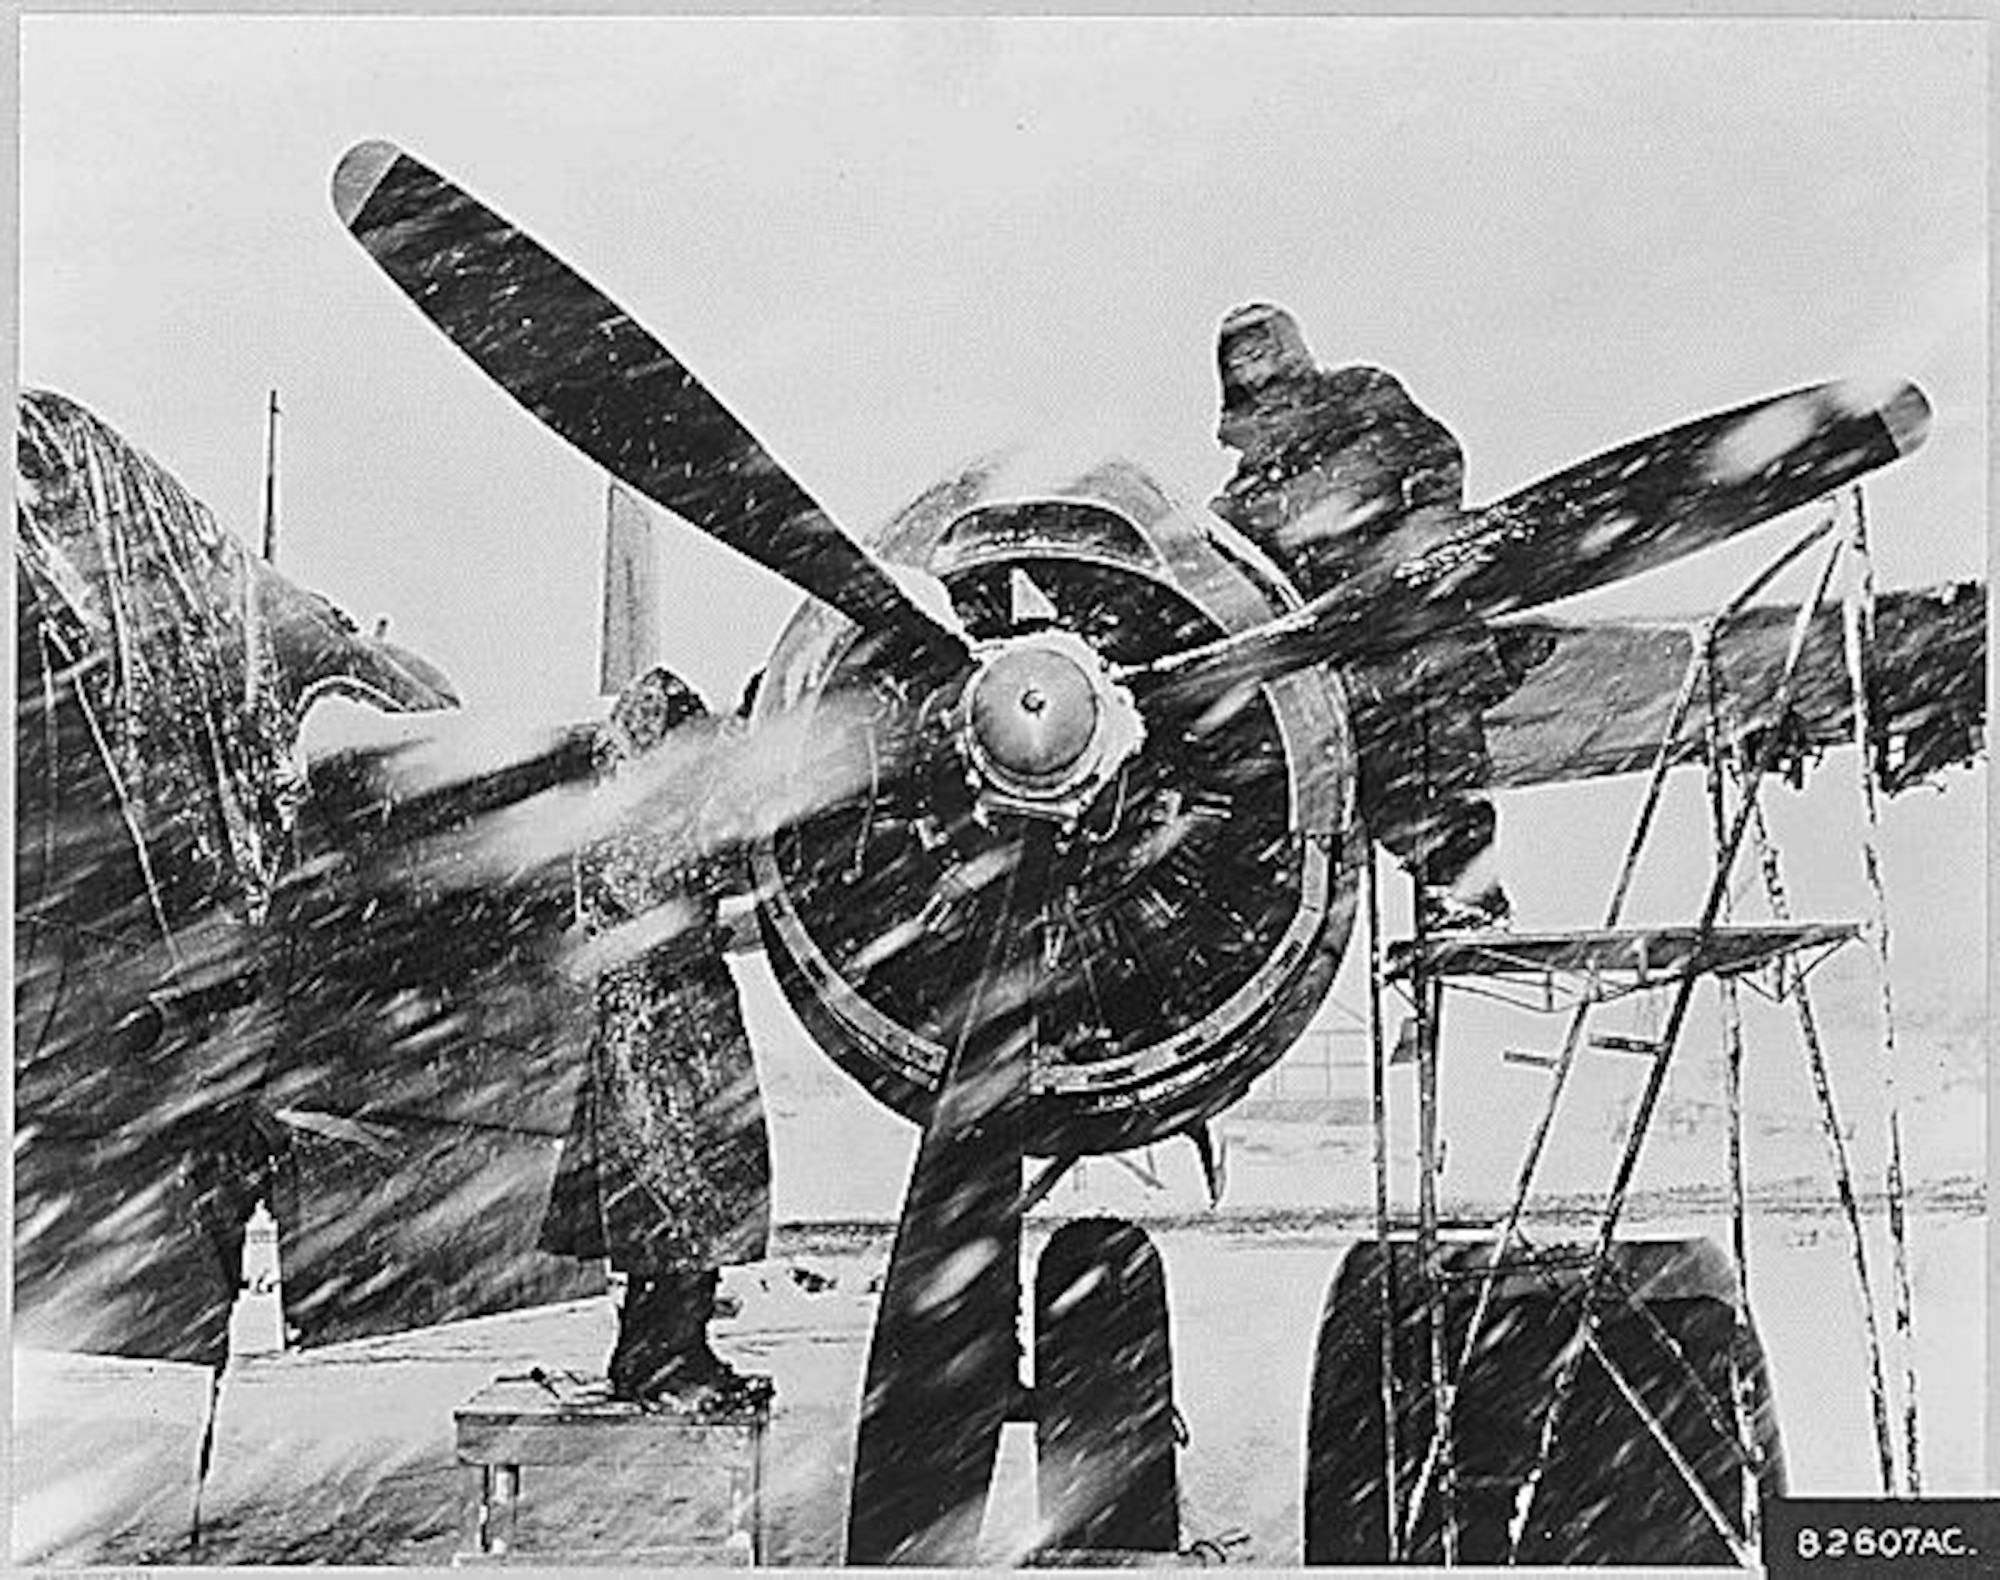 THE NATIONAL ARCHIVES - Ignoring a Korean snow storm, two ground crew memebers of the 3rd Bomb Wing work on an engine of a U.S. Air Force B-26 Night Intruder. These light bombers, carrying out "Operation Strangle," hit Communist troop supply lines every night in all kinds of weather. Armed with tons of bombs and ammunition, attacking visually or by radar, the twin engined B-26s have taken a heavy toll of enemy rolling stock since the 3rd Bomb Wing entered the war in June 1950., ca. 01/1952